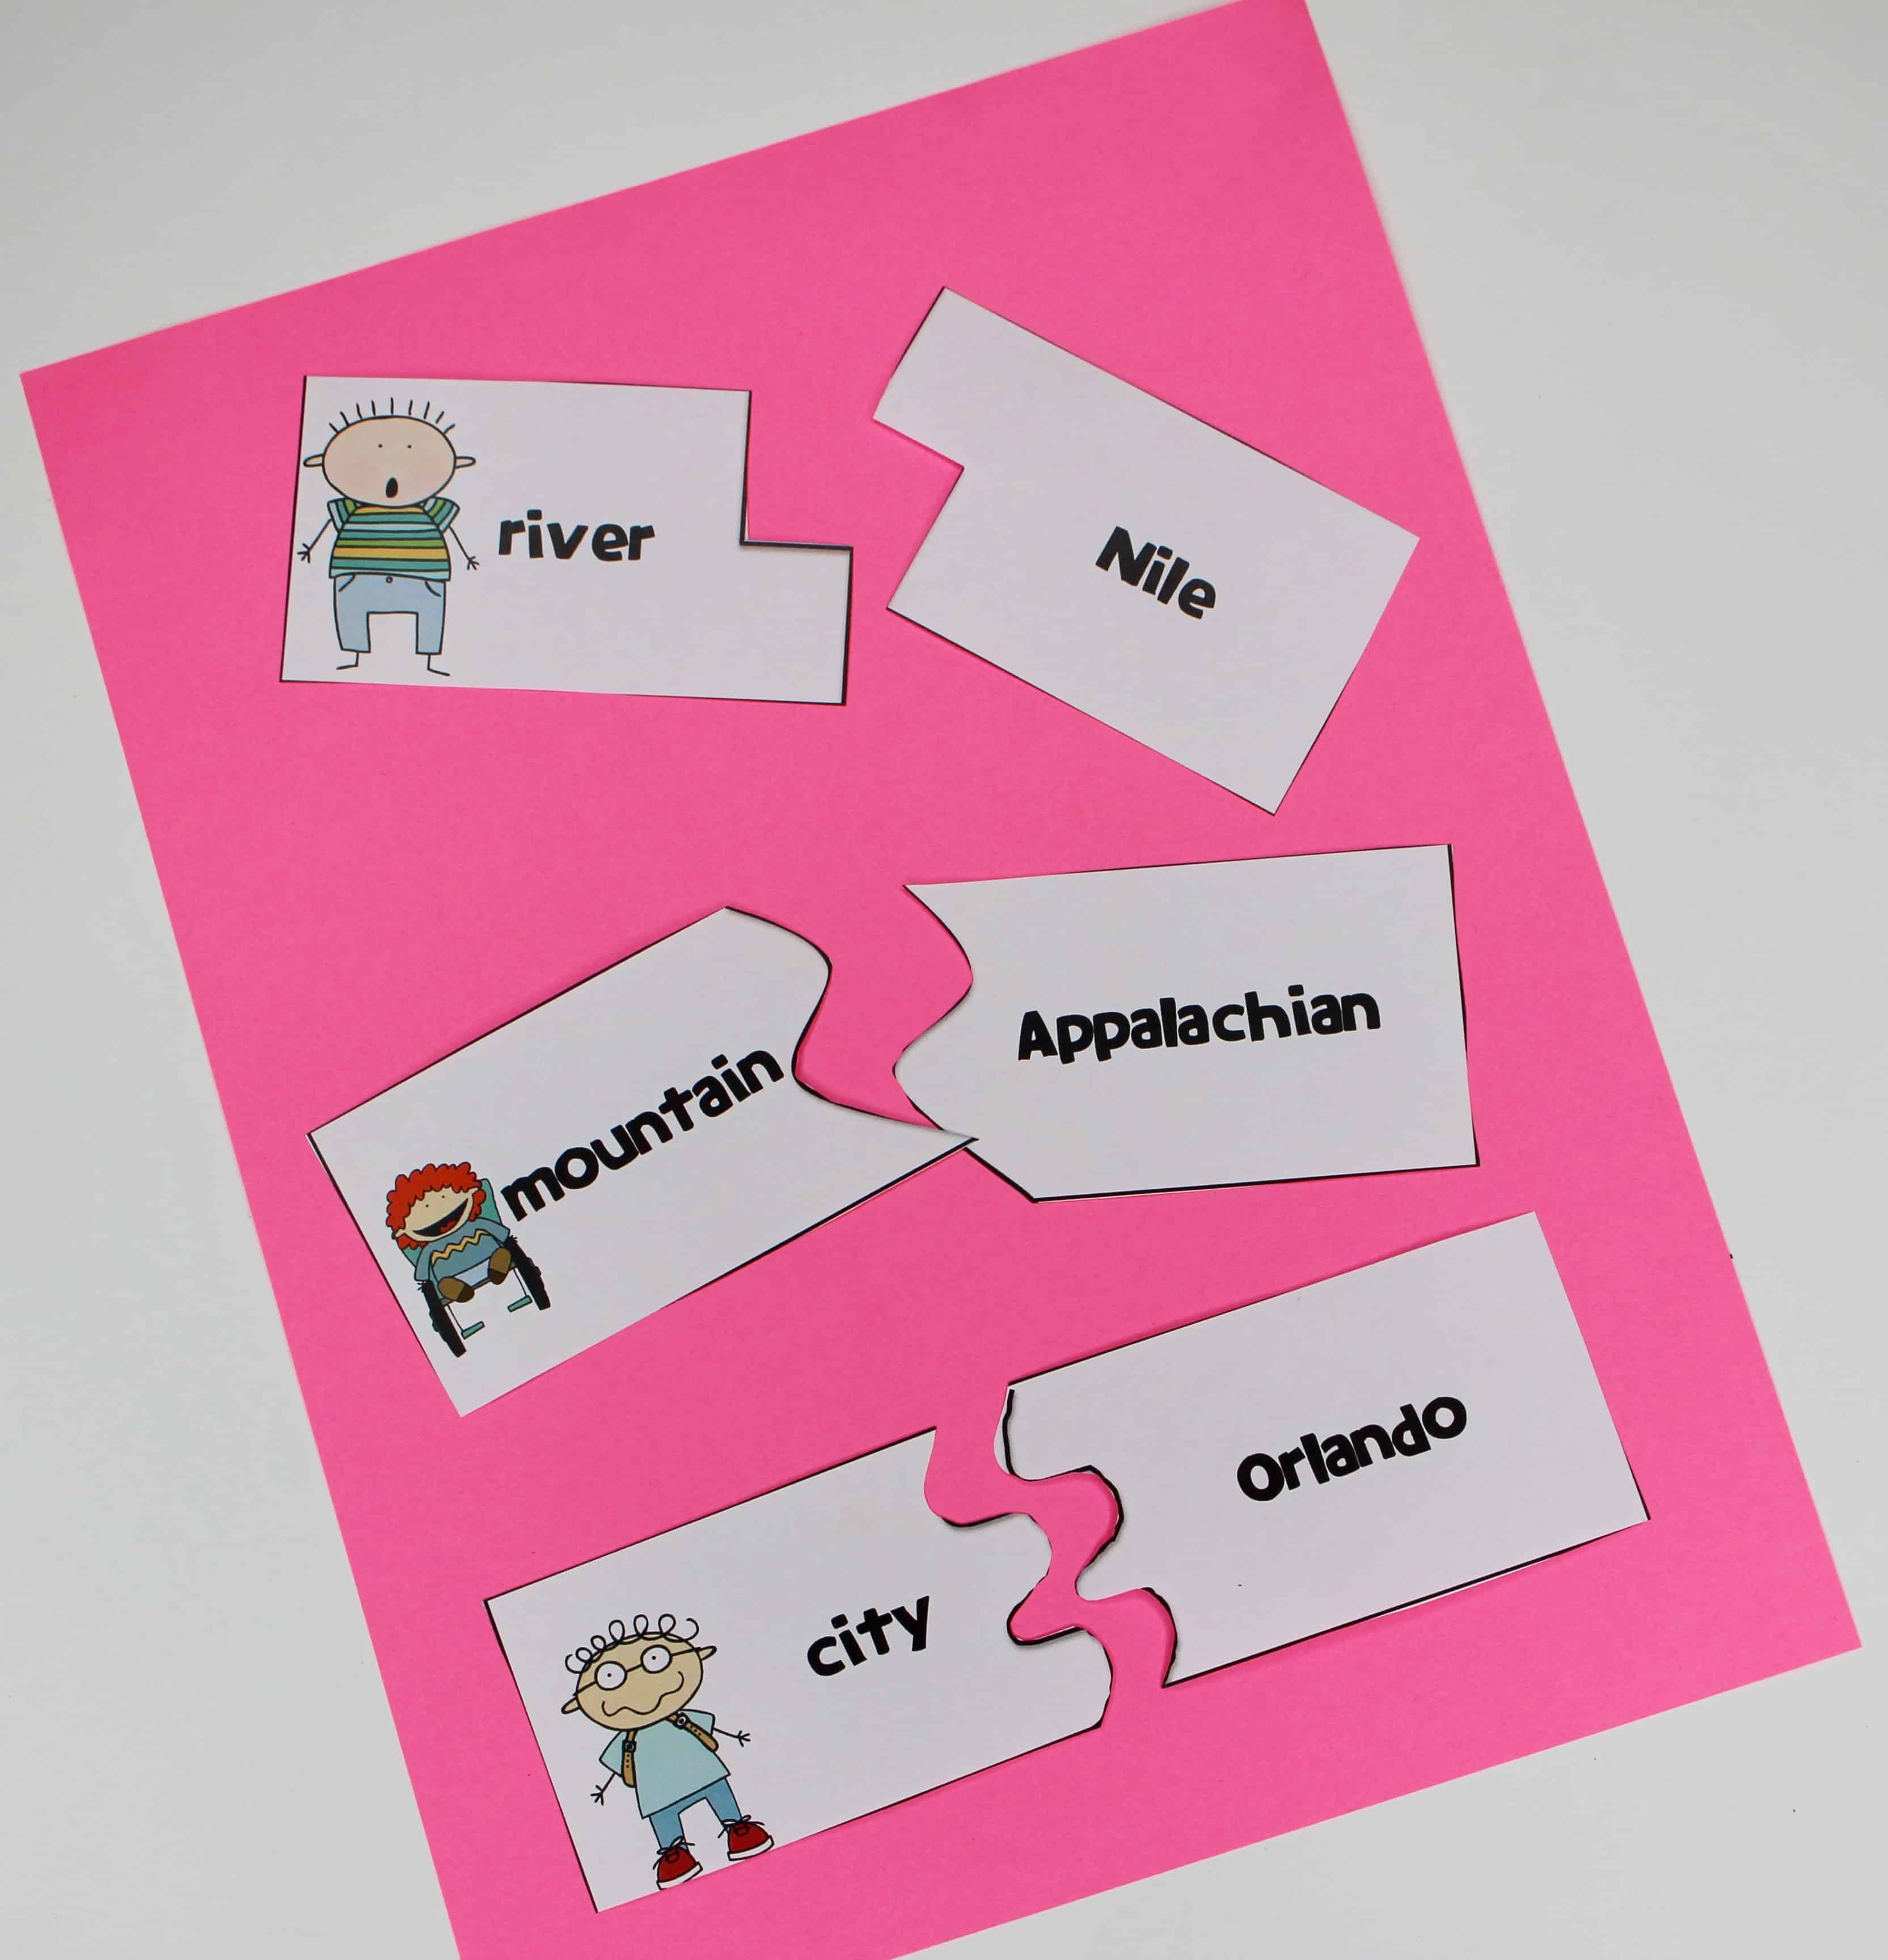 Grammar is usually most people's least favorite subject and topic, which is understandable. If you struggle with teaching nouns, then you'll want to read this blog post, where I'm sharing lots of tips for teaching nouns in fun and engaging ways that will catch -- and keep -- students' attention! Click through to read the full post for upper elementary teachers.